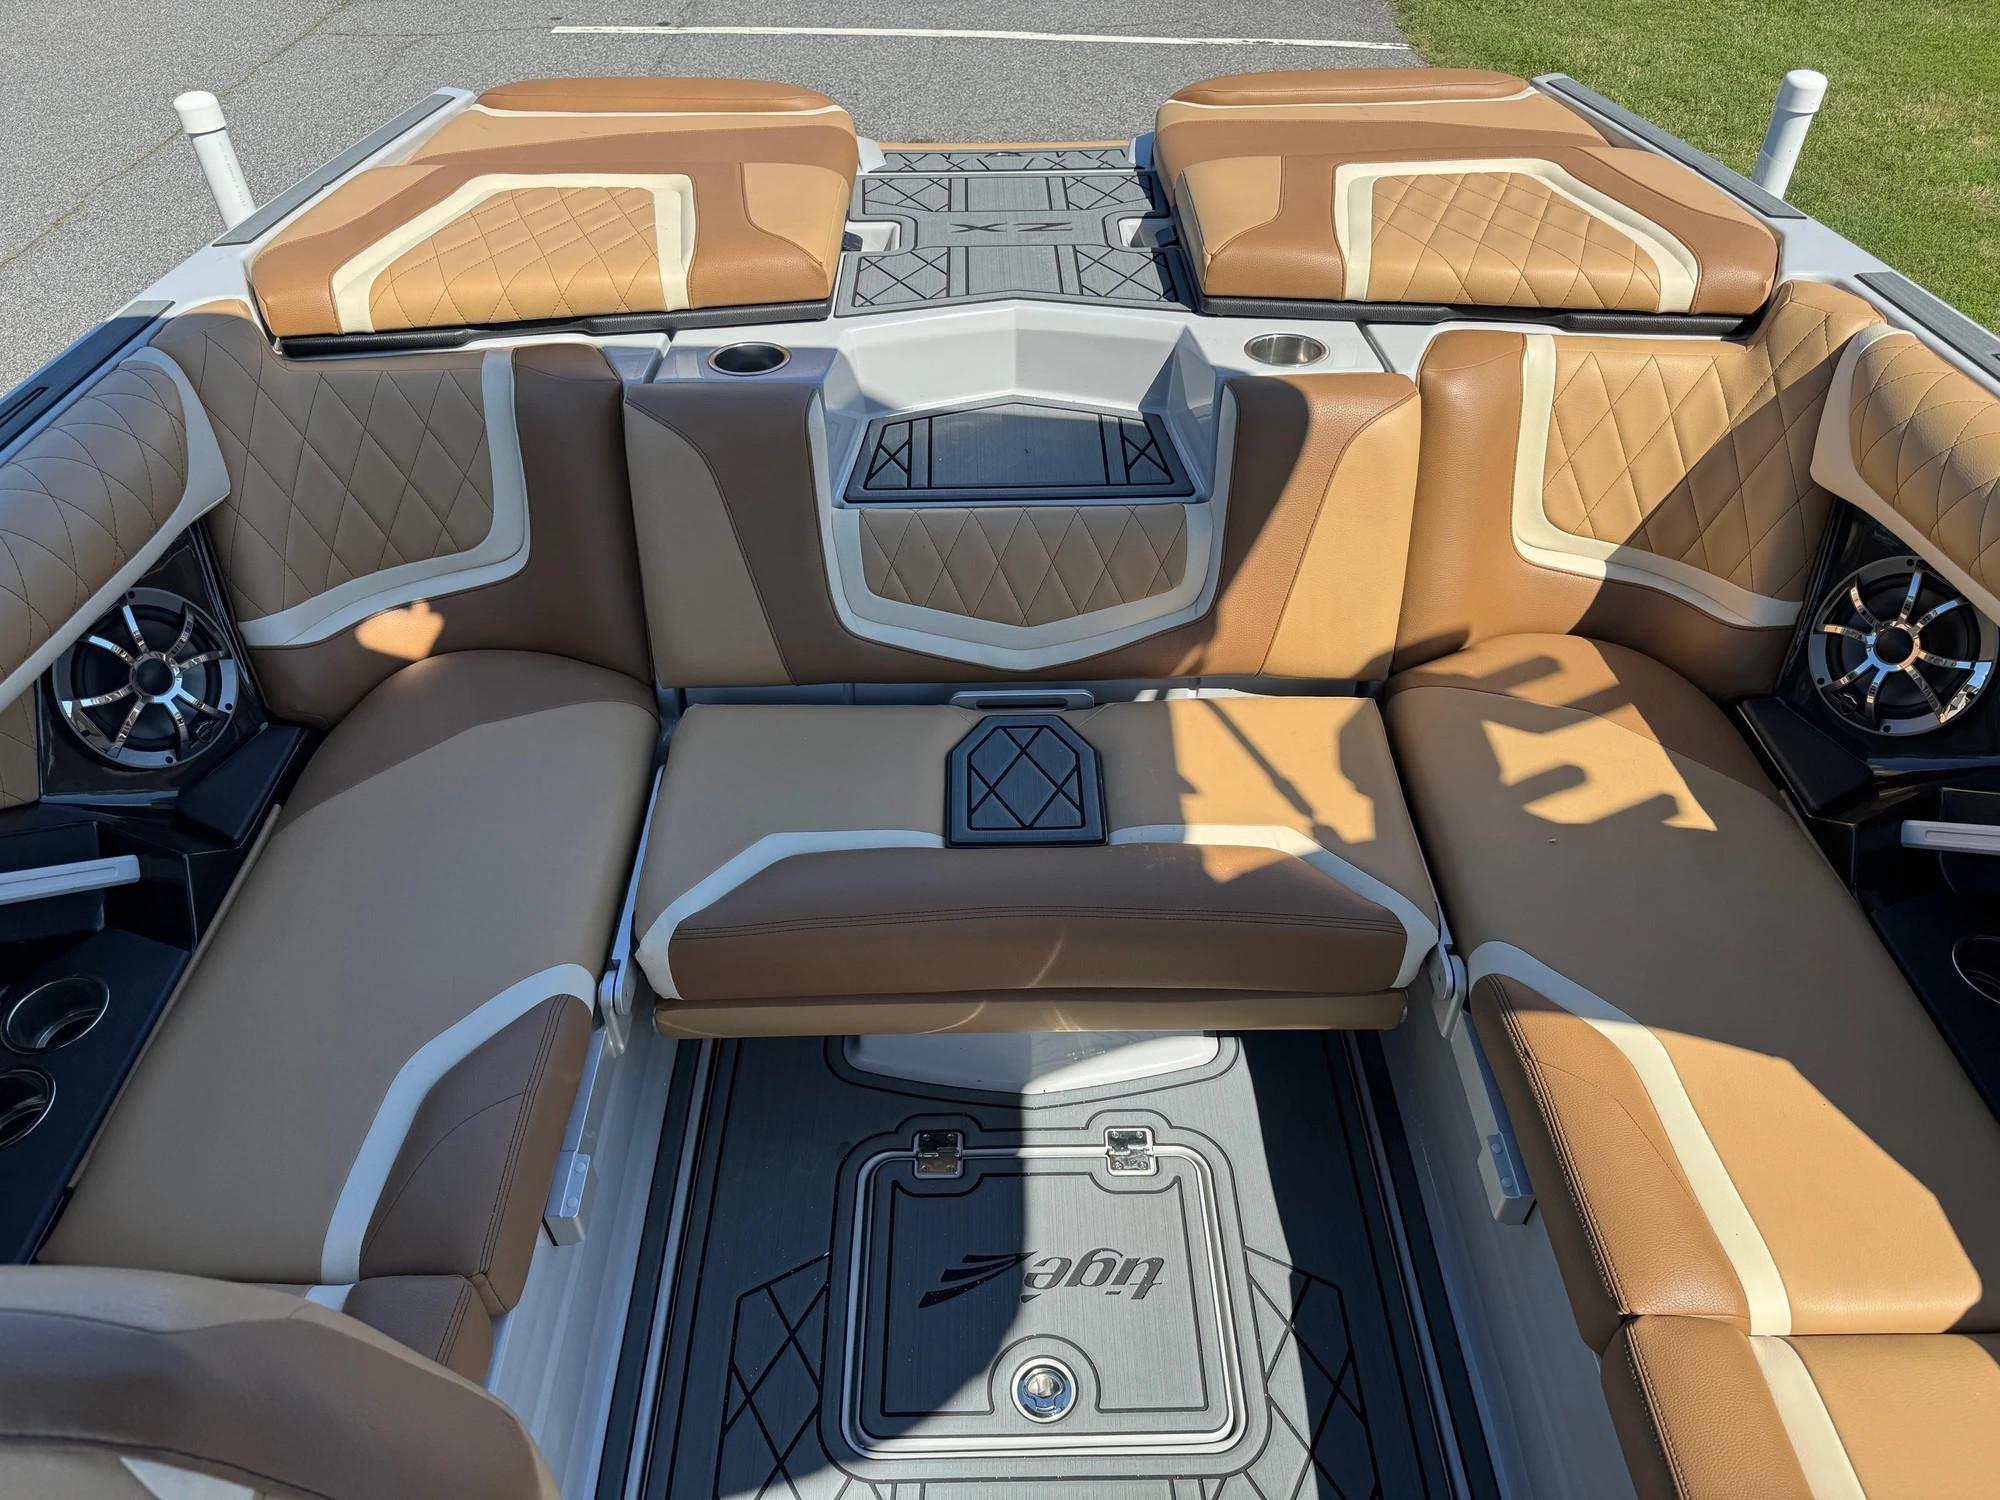 2021 Tigé 21 ZX Ski and Wakeboard for sale - YachtWorld